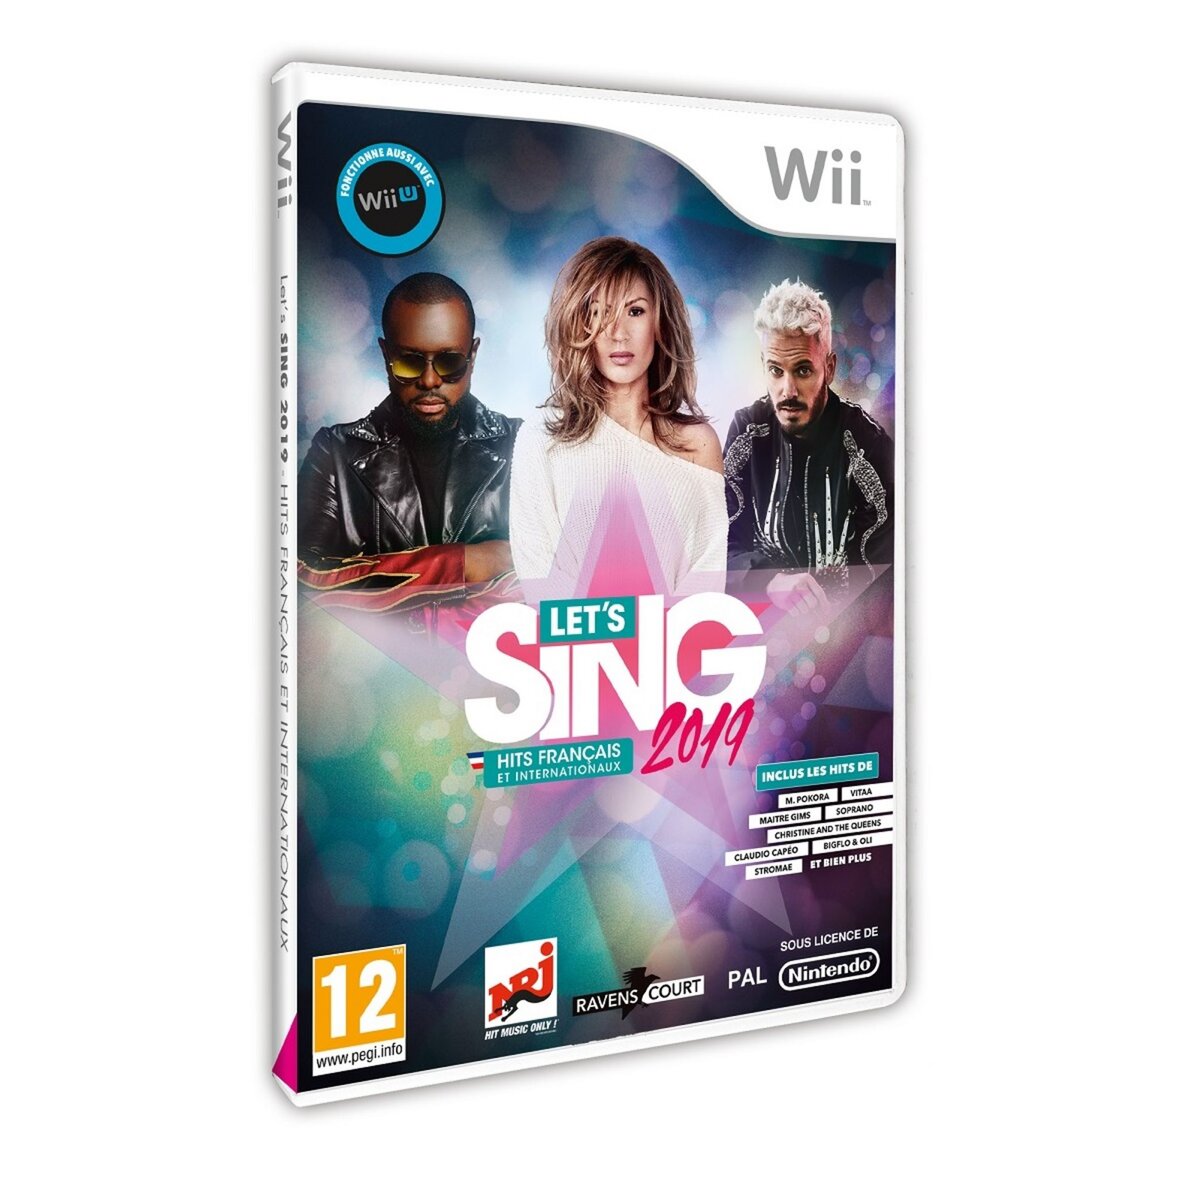 Let's Sing 2019 Wii